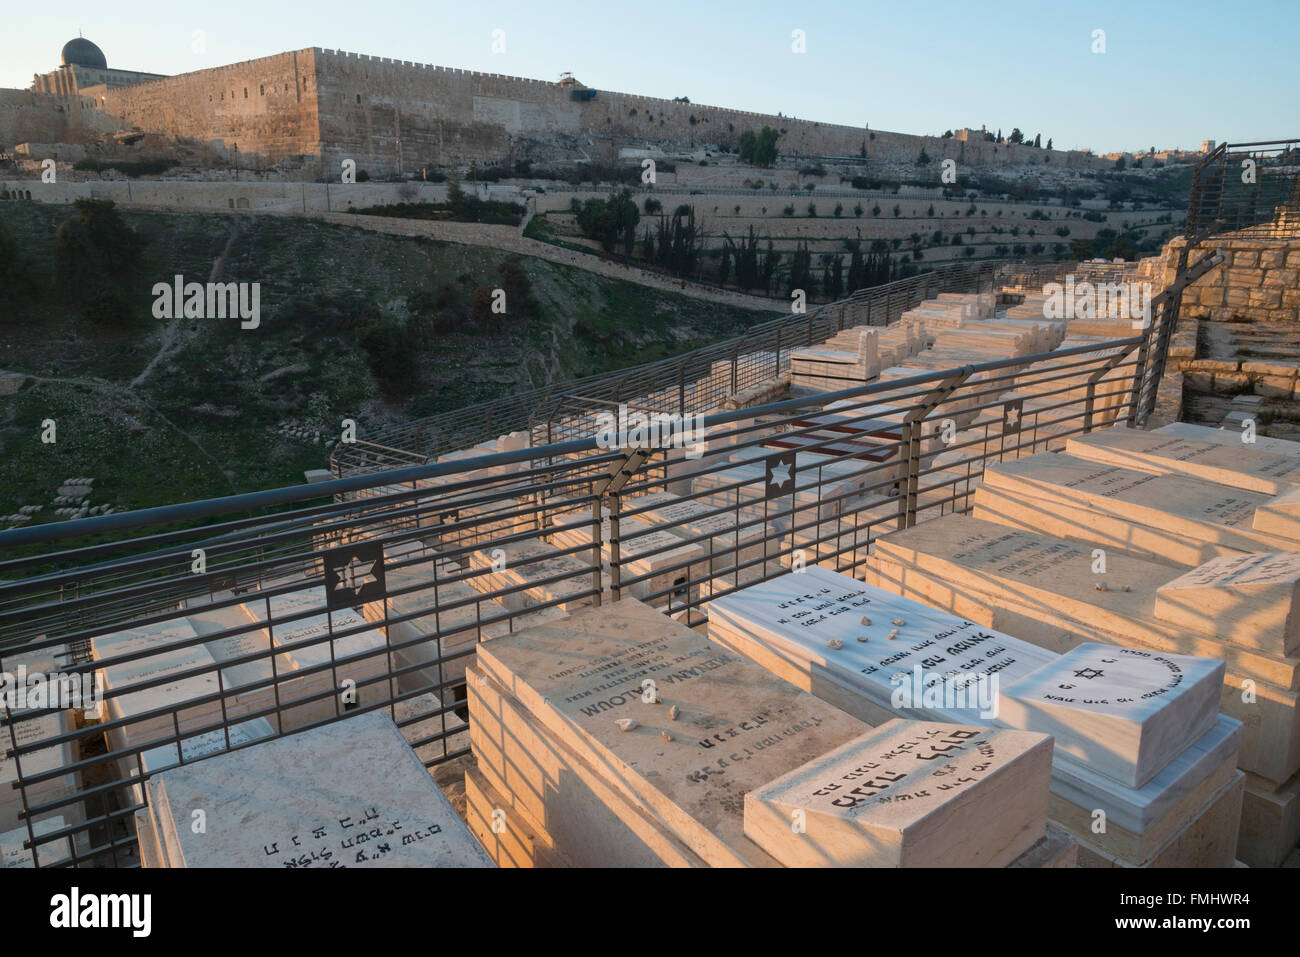 Tombstones on the Mount of Olives with the Old City walls and Al Aqsa mosque in Background. Jerusalem. Israel. Stock Photo